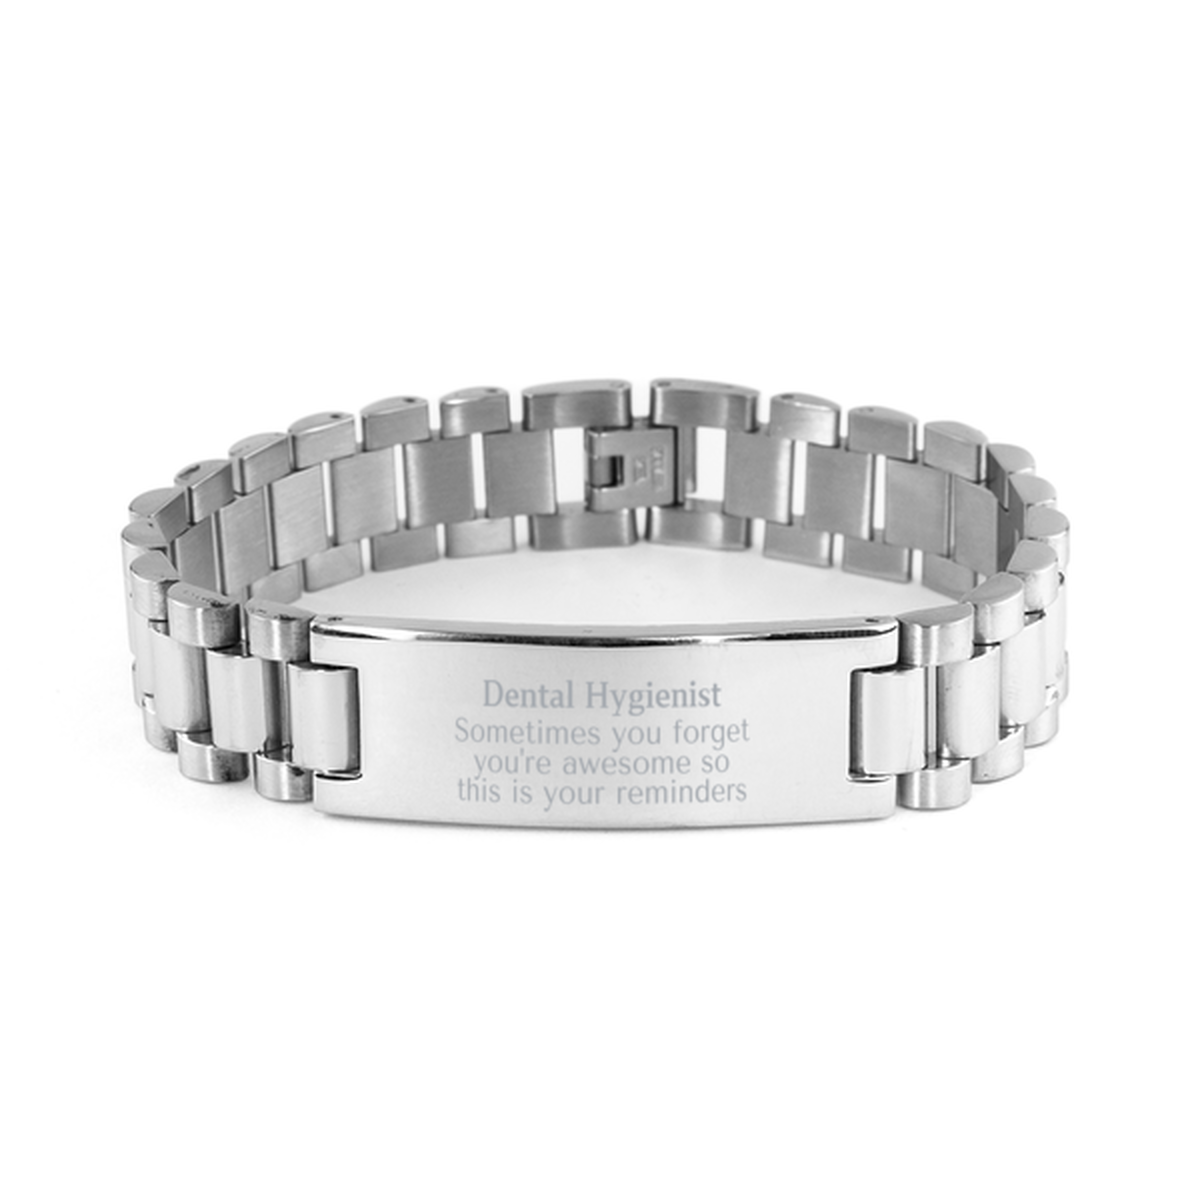 Sentimental Dental Hygienist Ladder Stainless Steel Bracelet, Dental Hygienist Sometimes you forget you're awesome so this is your reminders, Graduation Christmas Birthday Gifts for Dental Hygienist, Men, Women, Coworkers